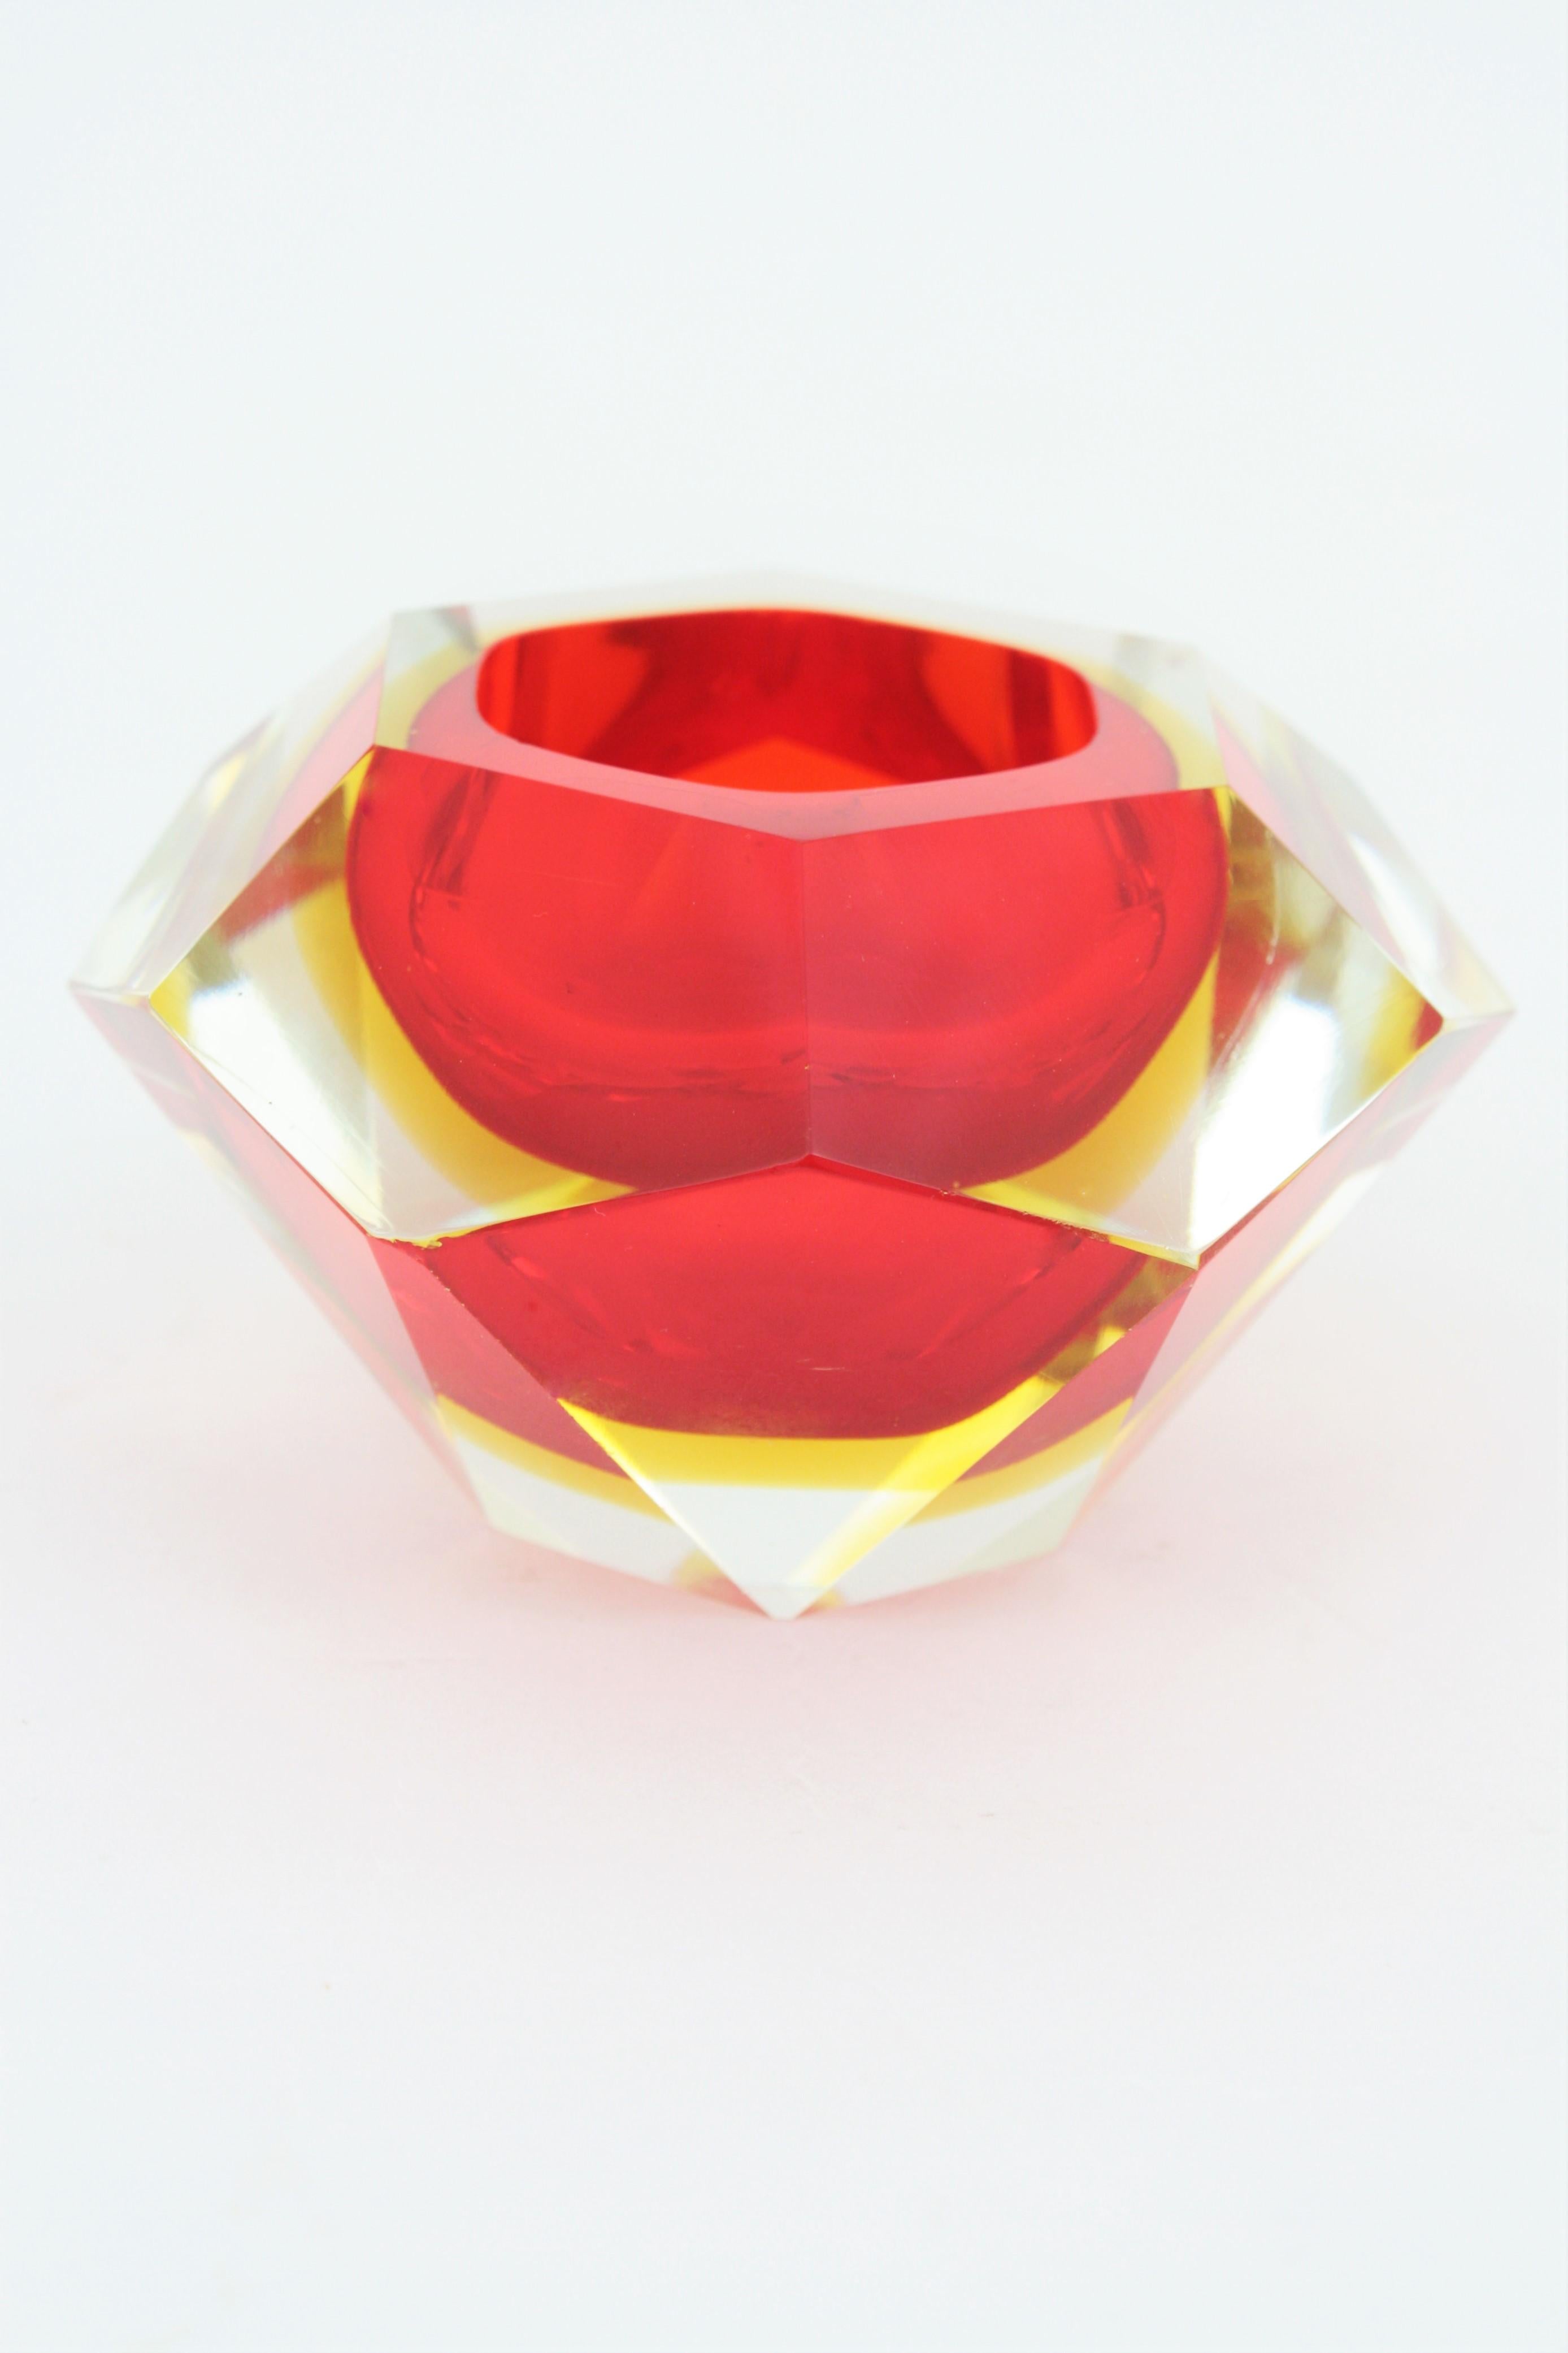 Flavio Poli Murano Red, Yellow and Clear Faceted Glass Diamond Bowl or Ashtray In Good Condition For Sale In Barcelona, ES